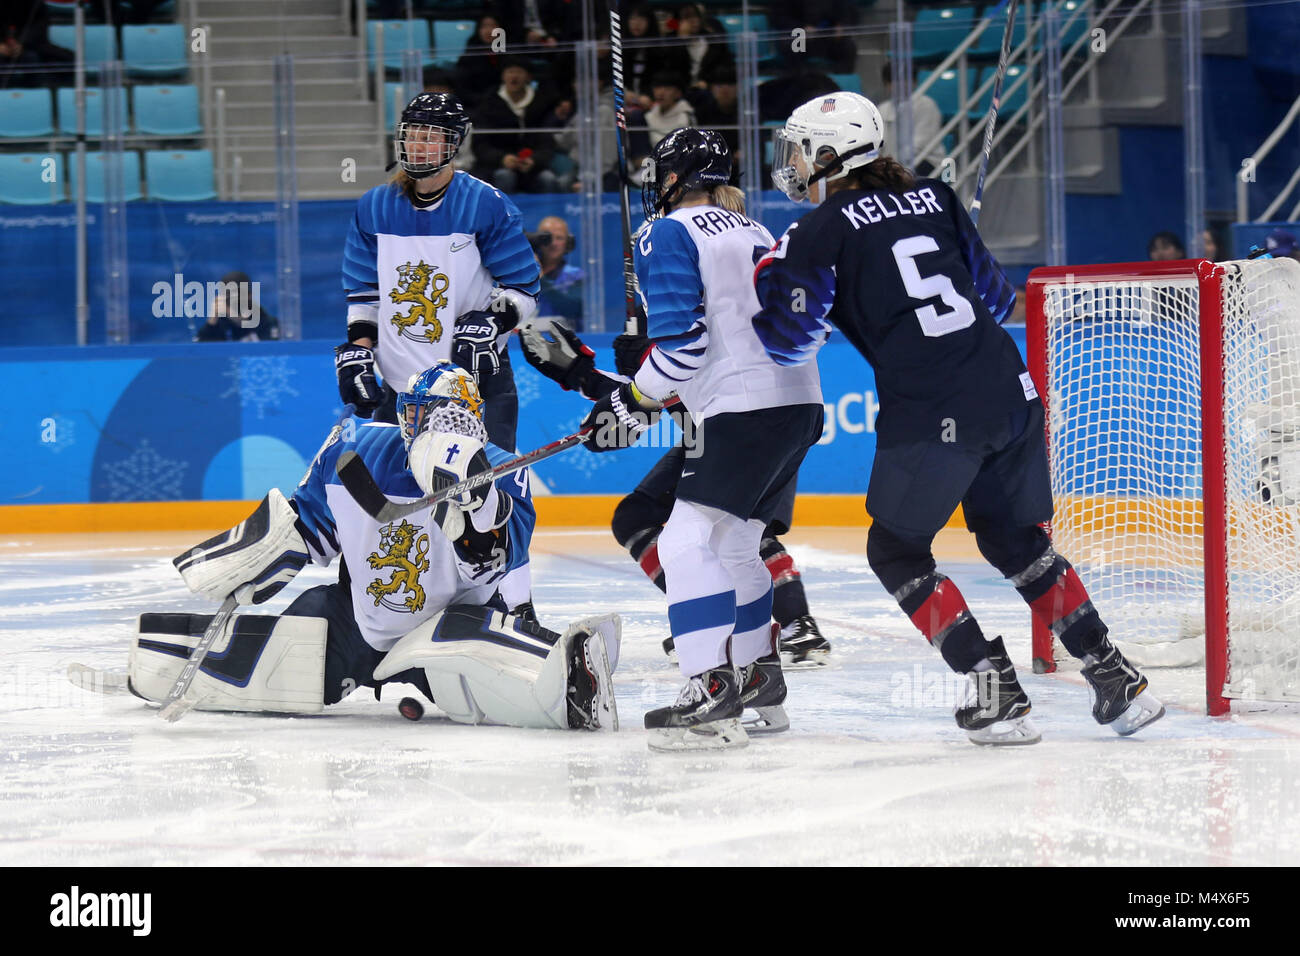 Gangneung, South Korea. 19th Feb, 2018. USA scores on Finland goalkeeper NOORA RATY during the Ice Hockey: Women's Play-offs Semifinals at Gangneung Hockey Centre during the 2018 Pyeongchang Winter Olympic Games. Credit: Scott Mc Kiernan/ZUMA Wire/Alamy Live News Stock Photo